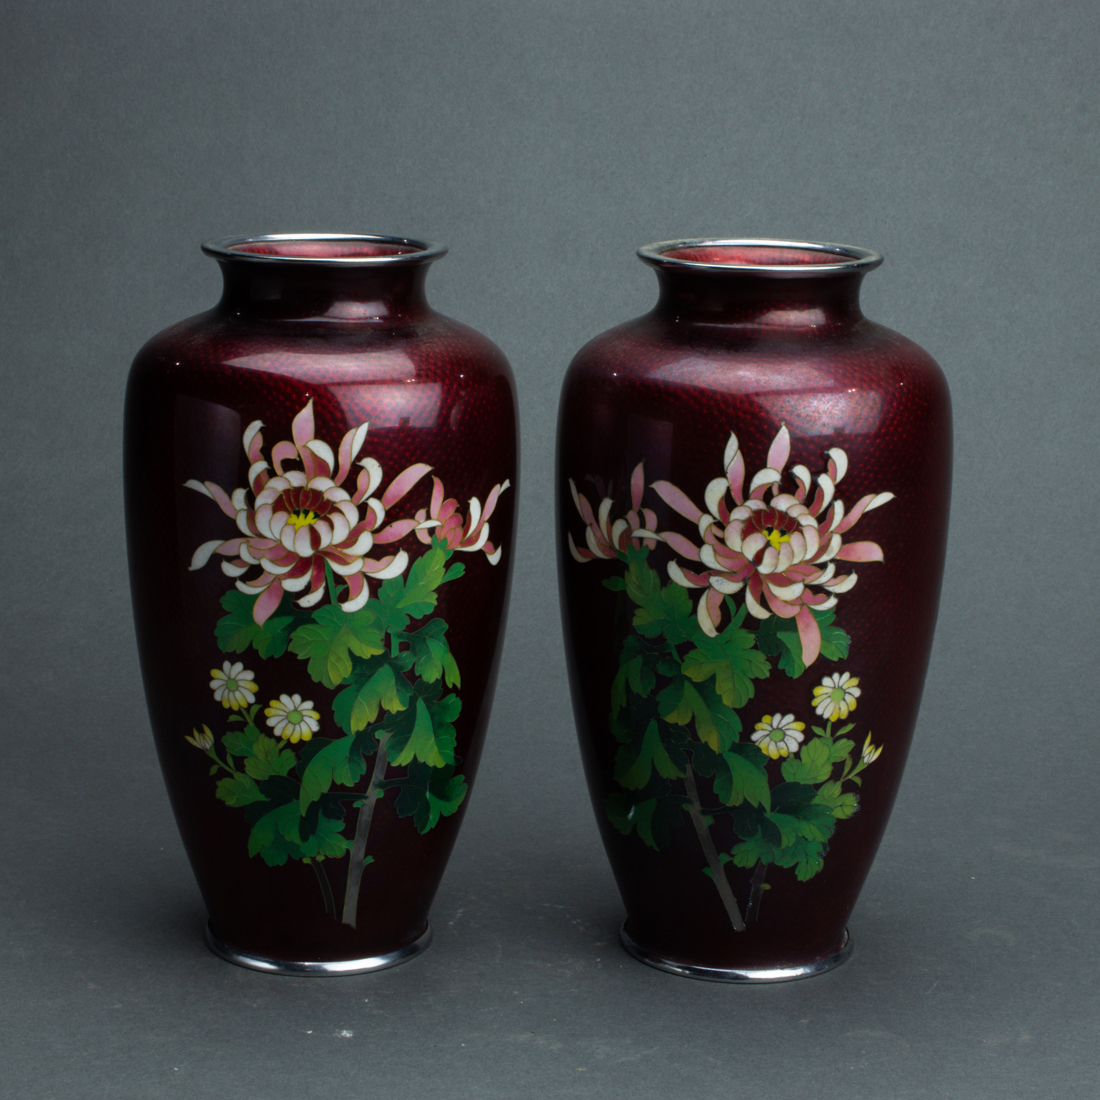 PAIR OF JAPANESE GINBARI VASES 3a14d4